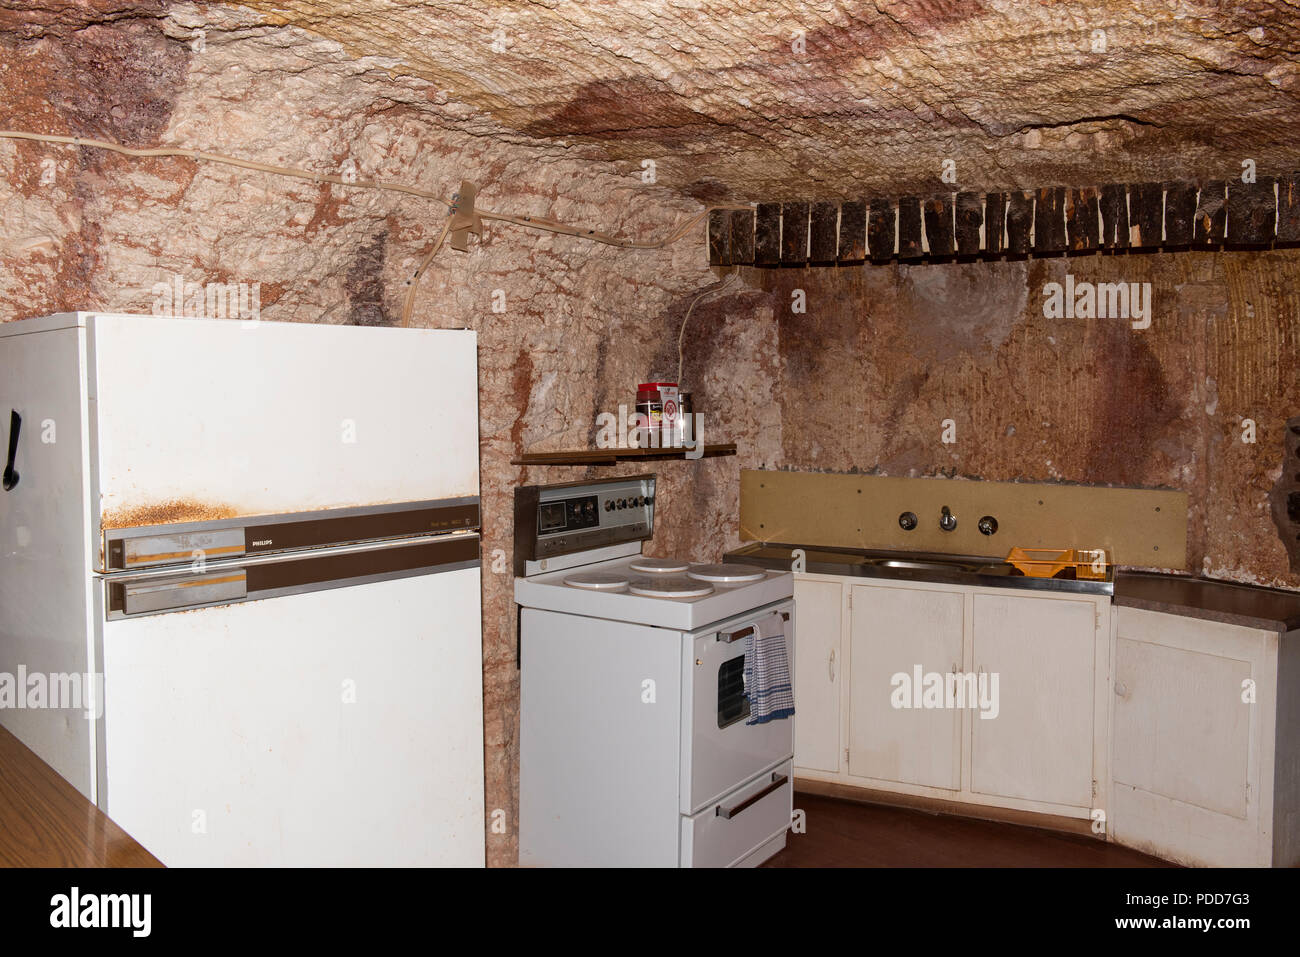 Australia, South Australia, Coober Pedy. Home to one of the richest opal fields in the world. Umoona Opal Mine & Museum. Typical underground home, kit Stock Photo